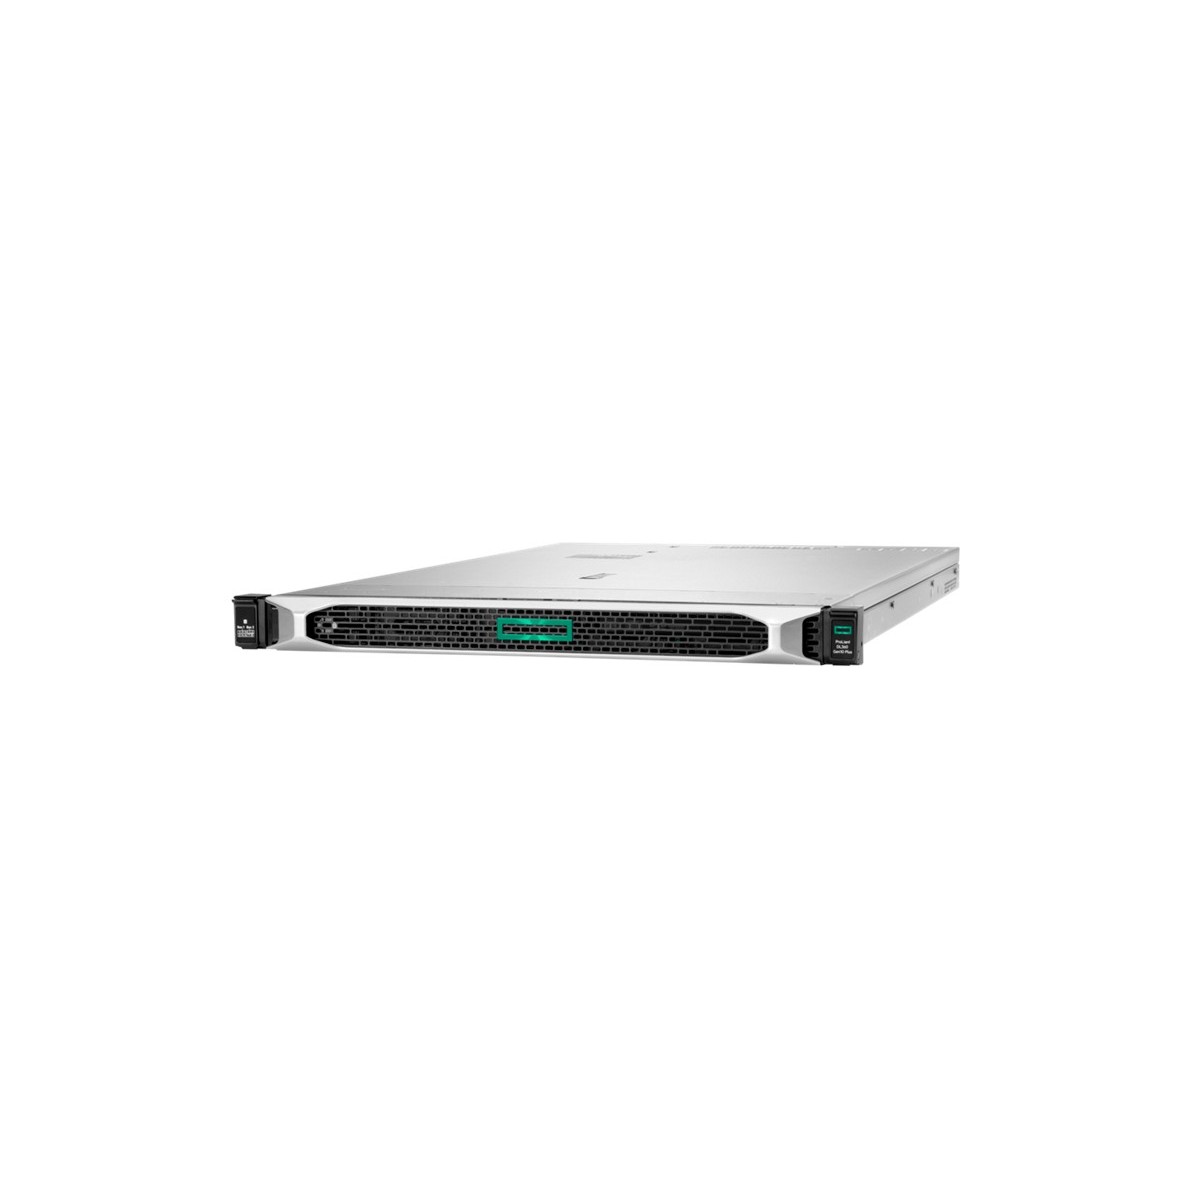 HPE DL360 G10+ 4314 MR416I-A NC